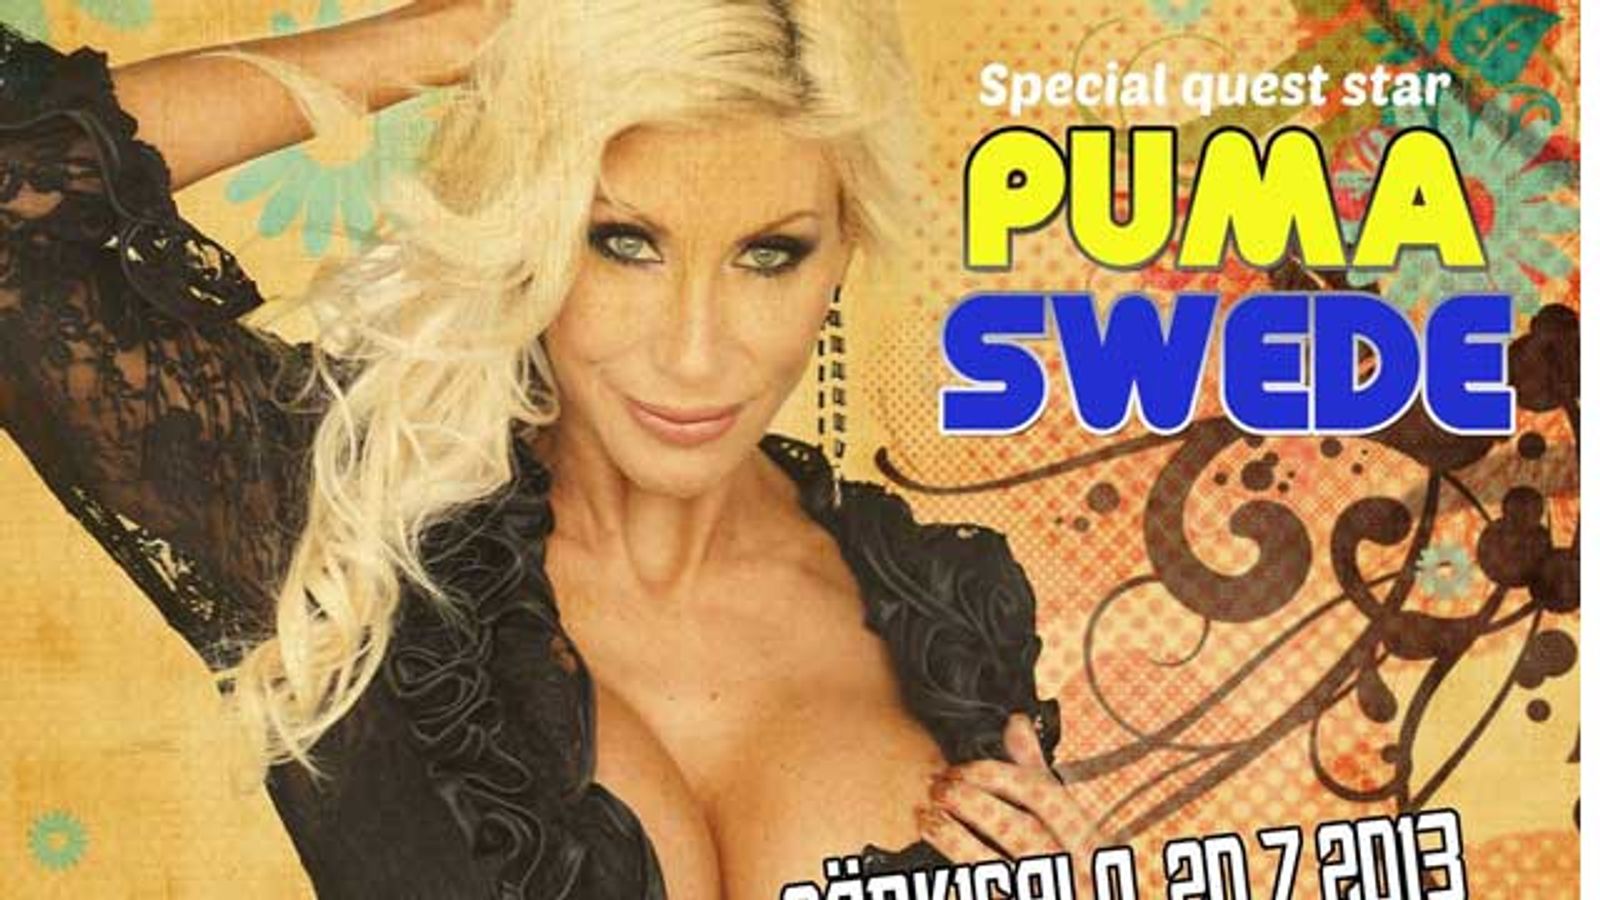 Puma Swede Headlines Summer Party in Finland July 20